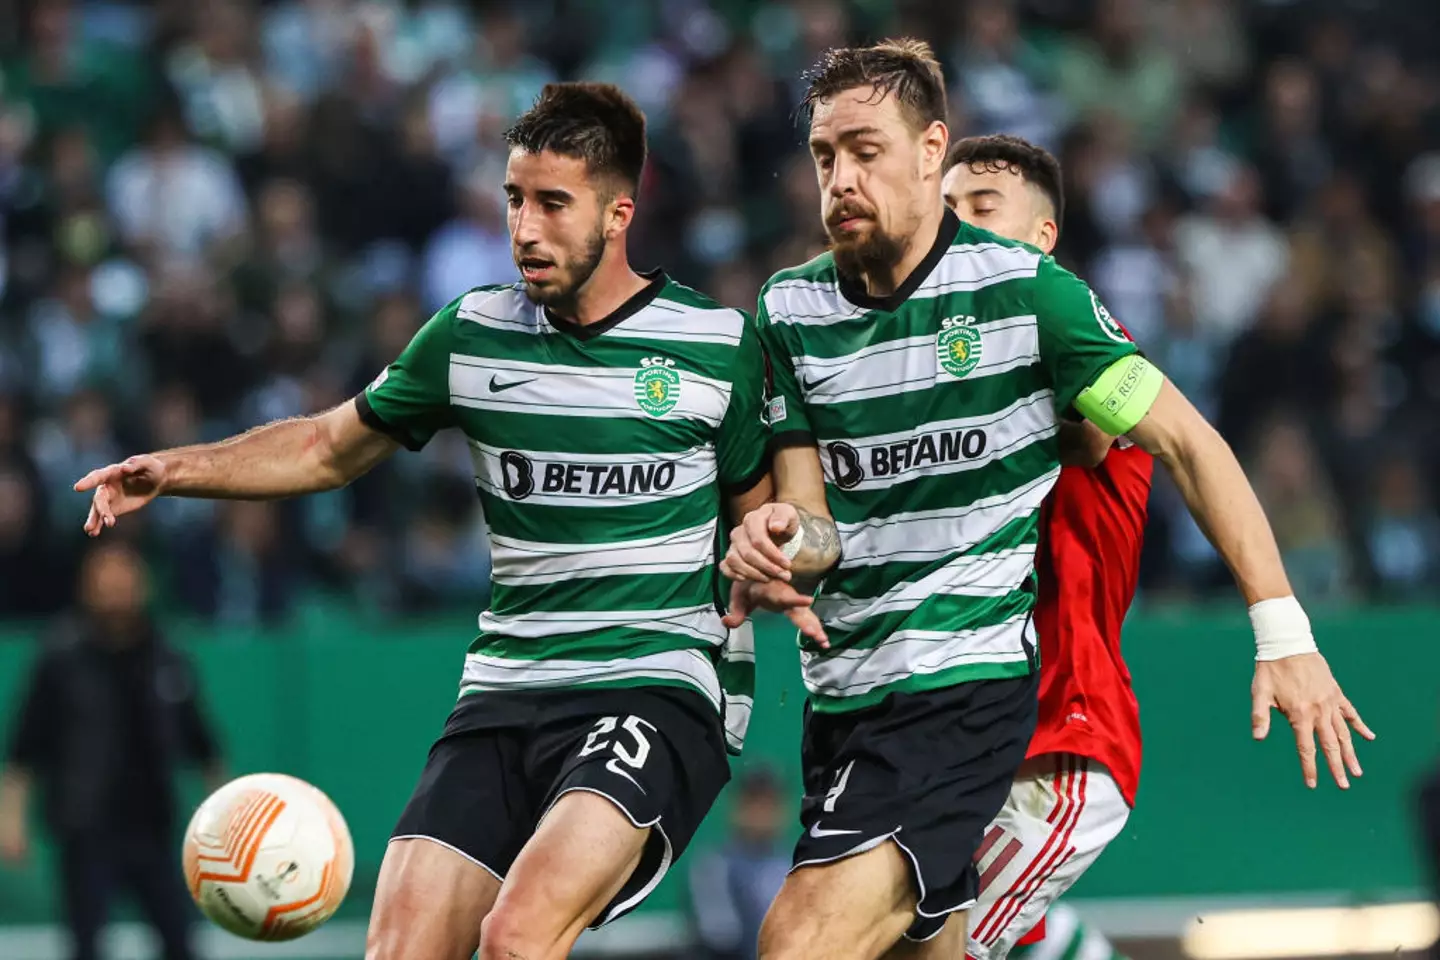 Sporting Lisbon defenders Goncalo Inacio and Sebastian Coates pictured (